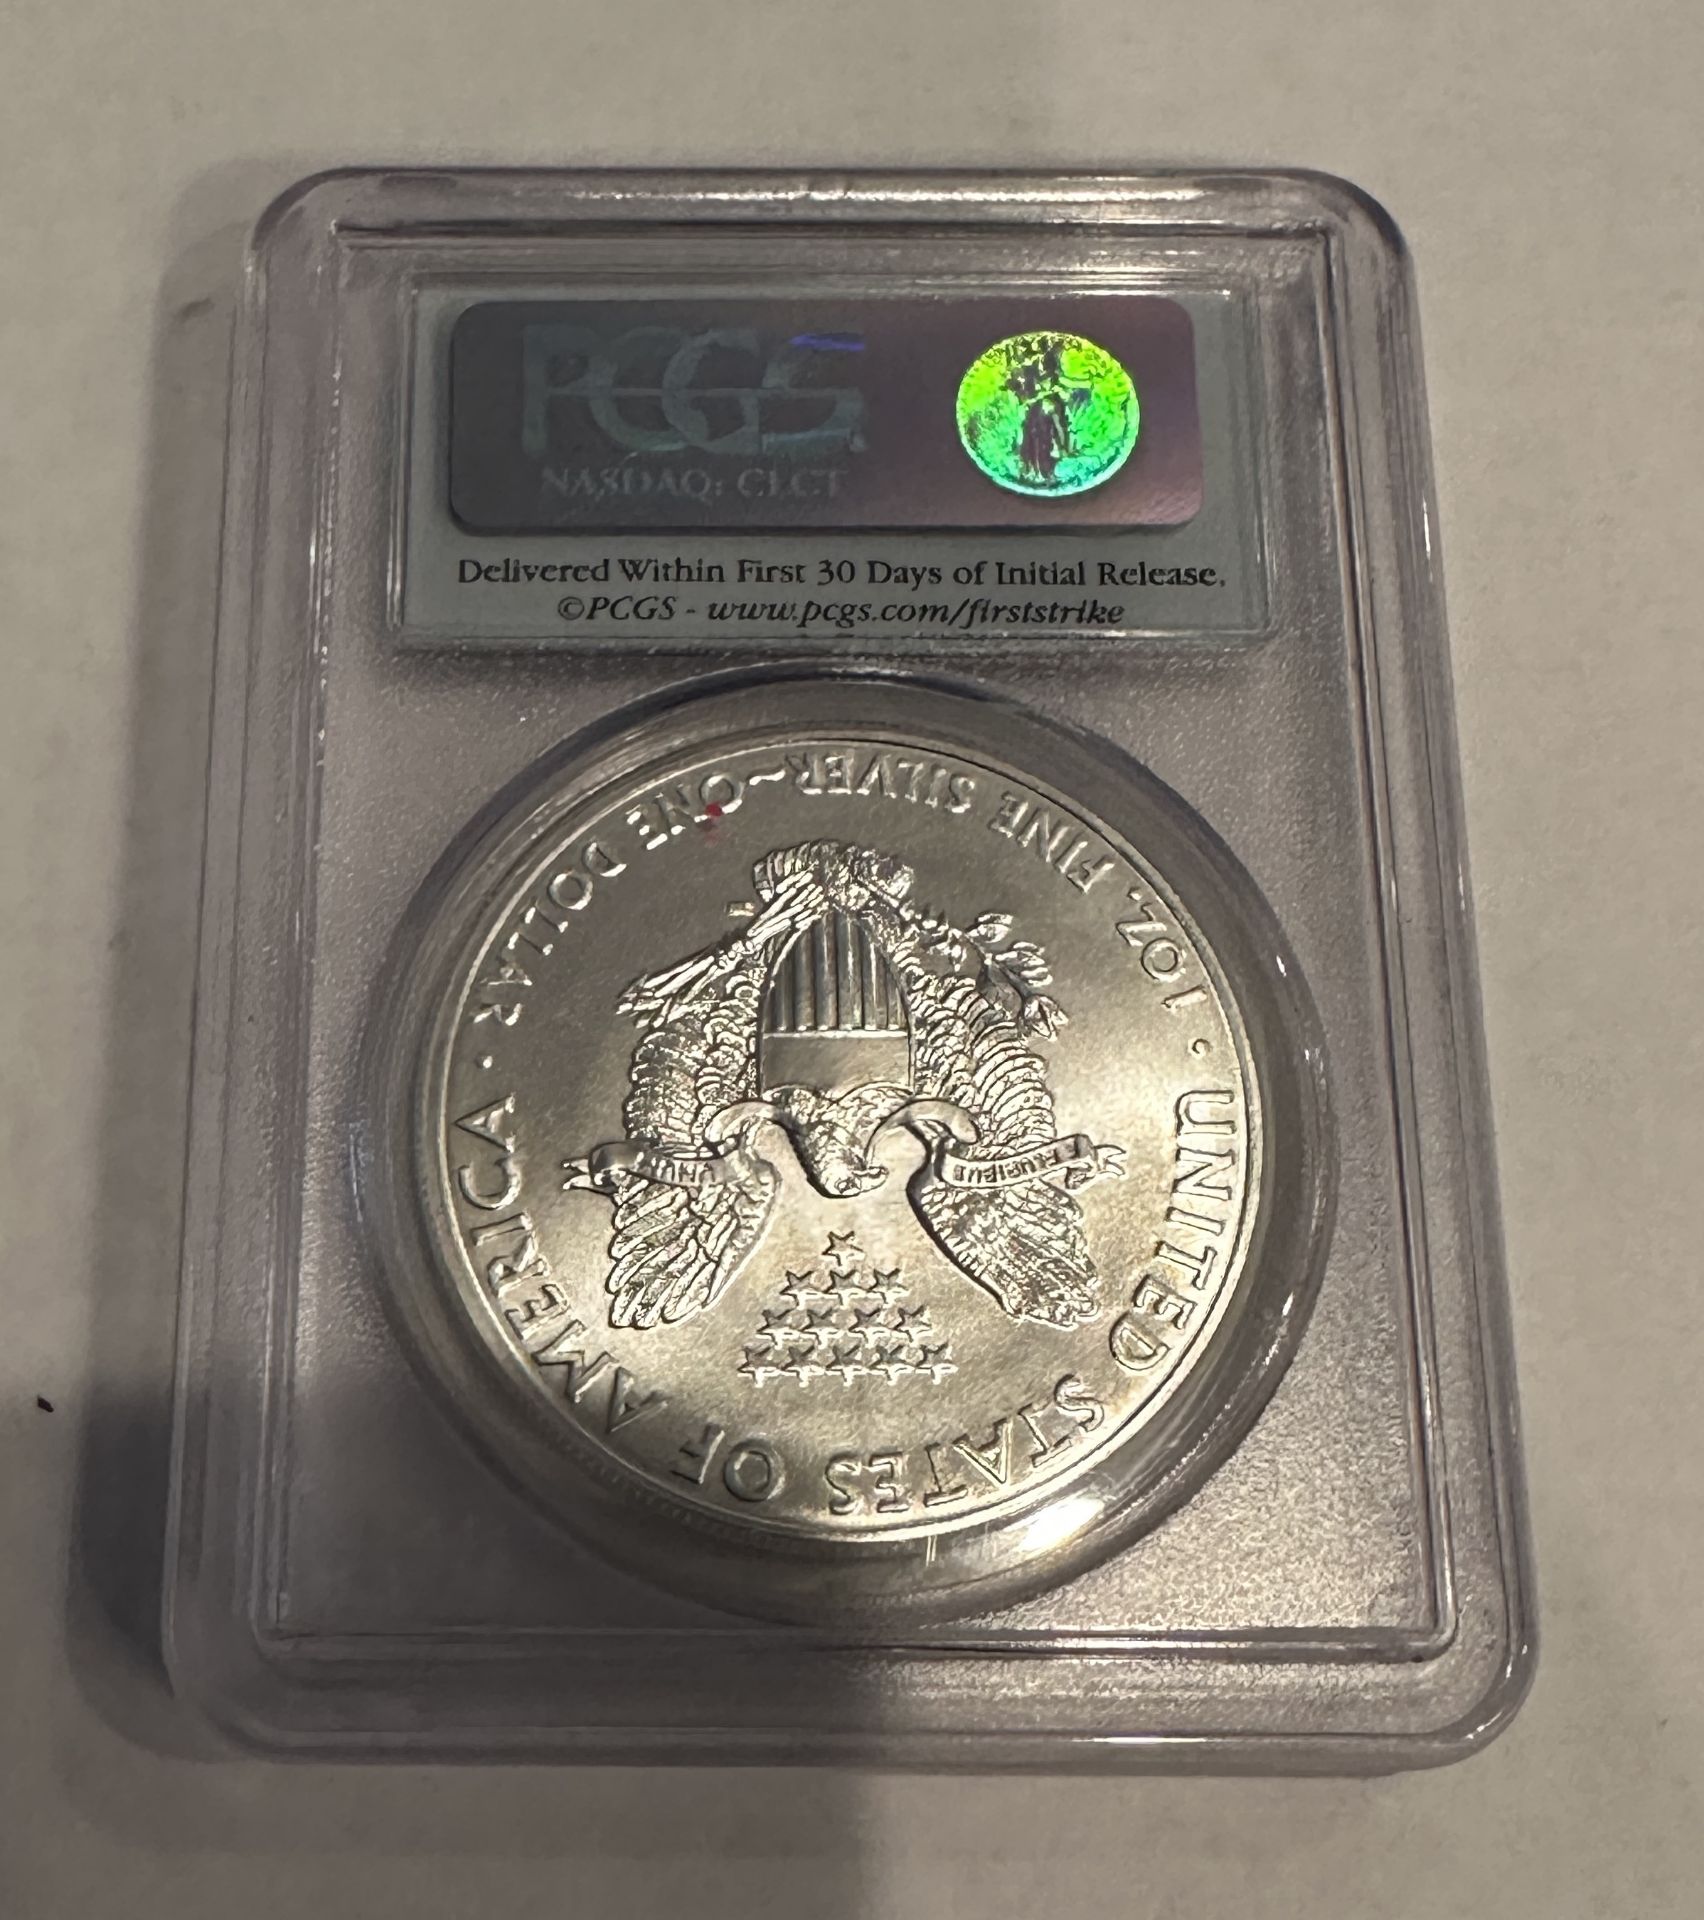 2011 SILVER EAGLE MCGS MS69 $1 PCGS - Image 2 of 2